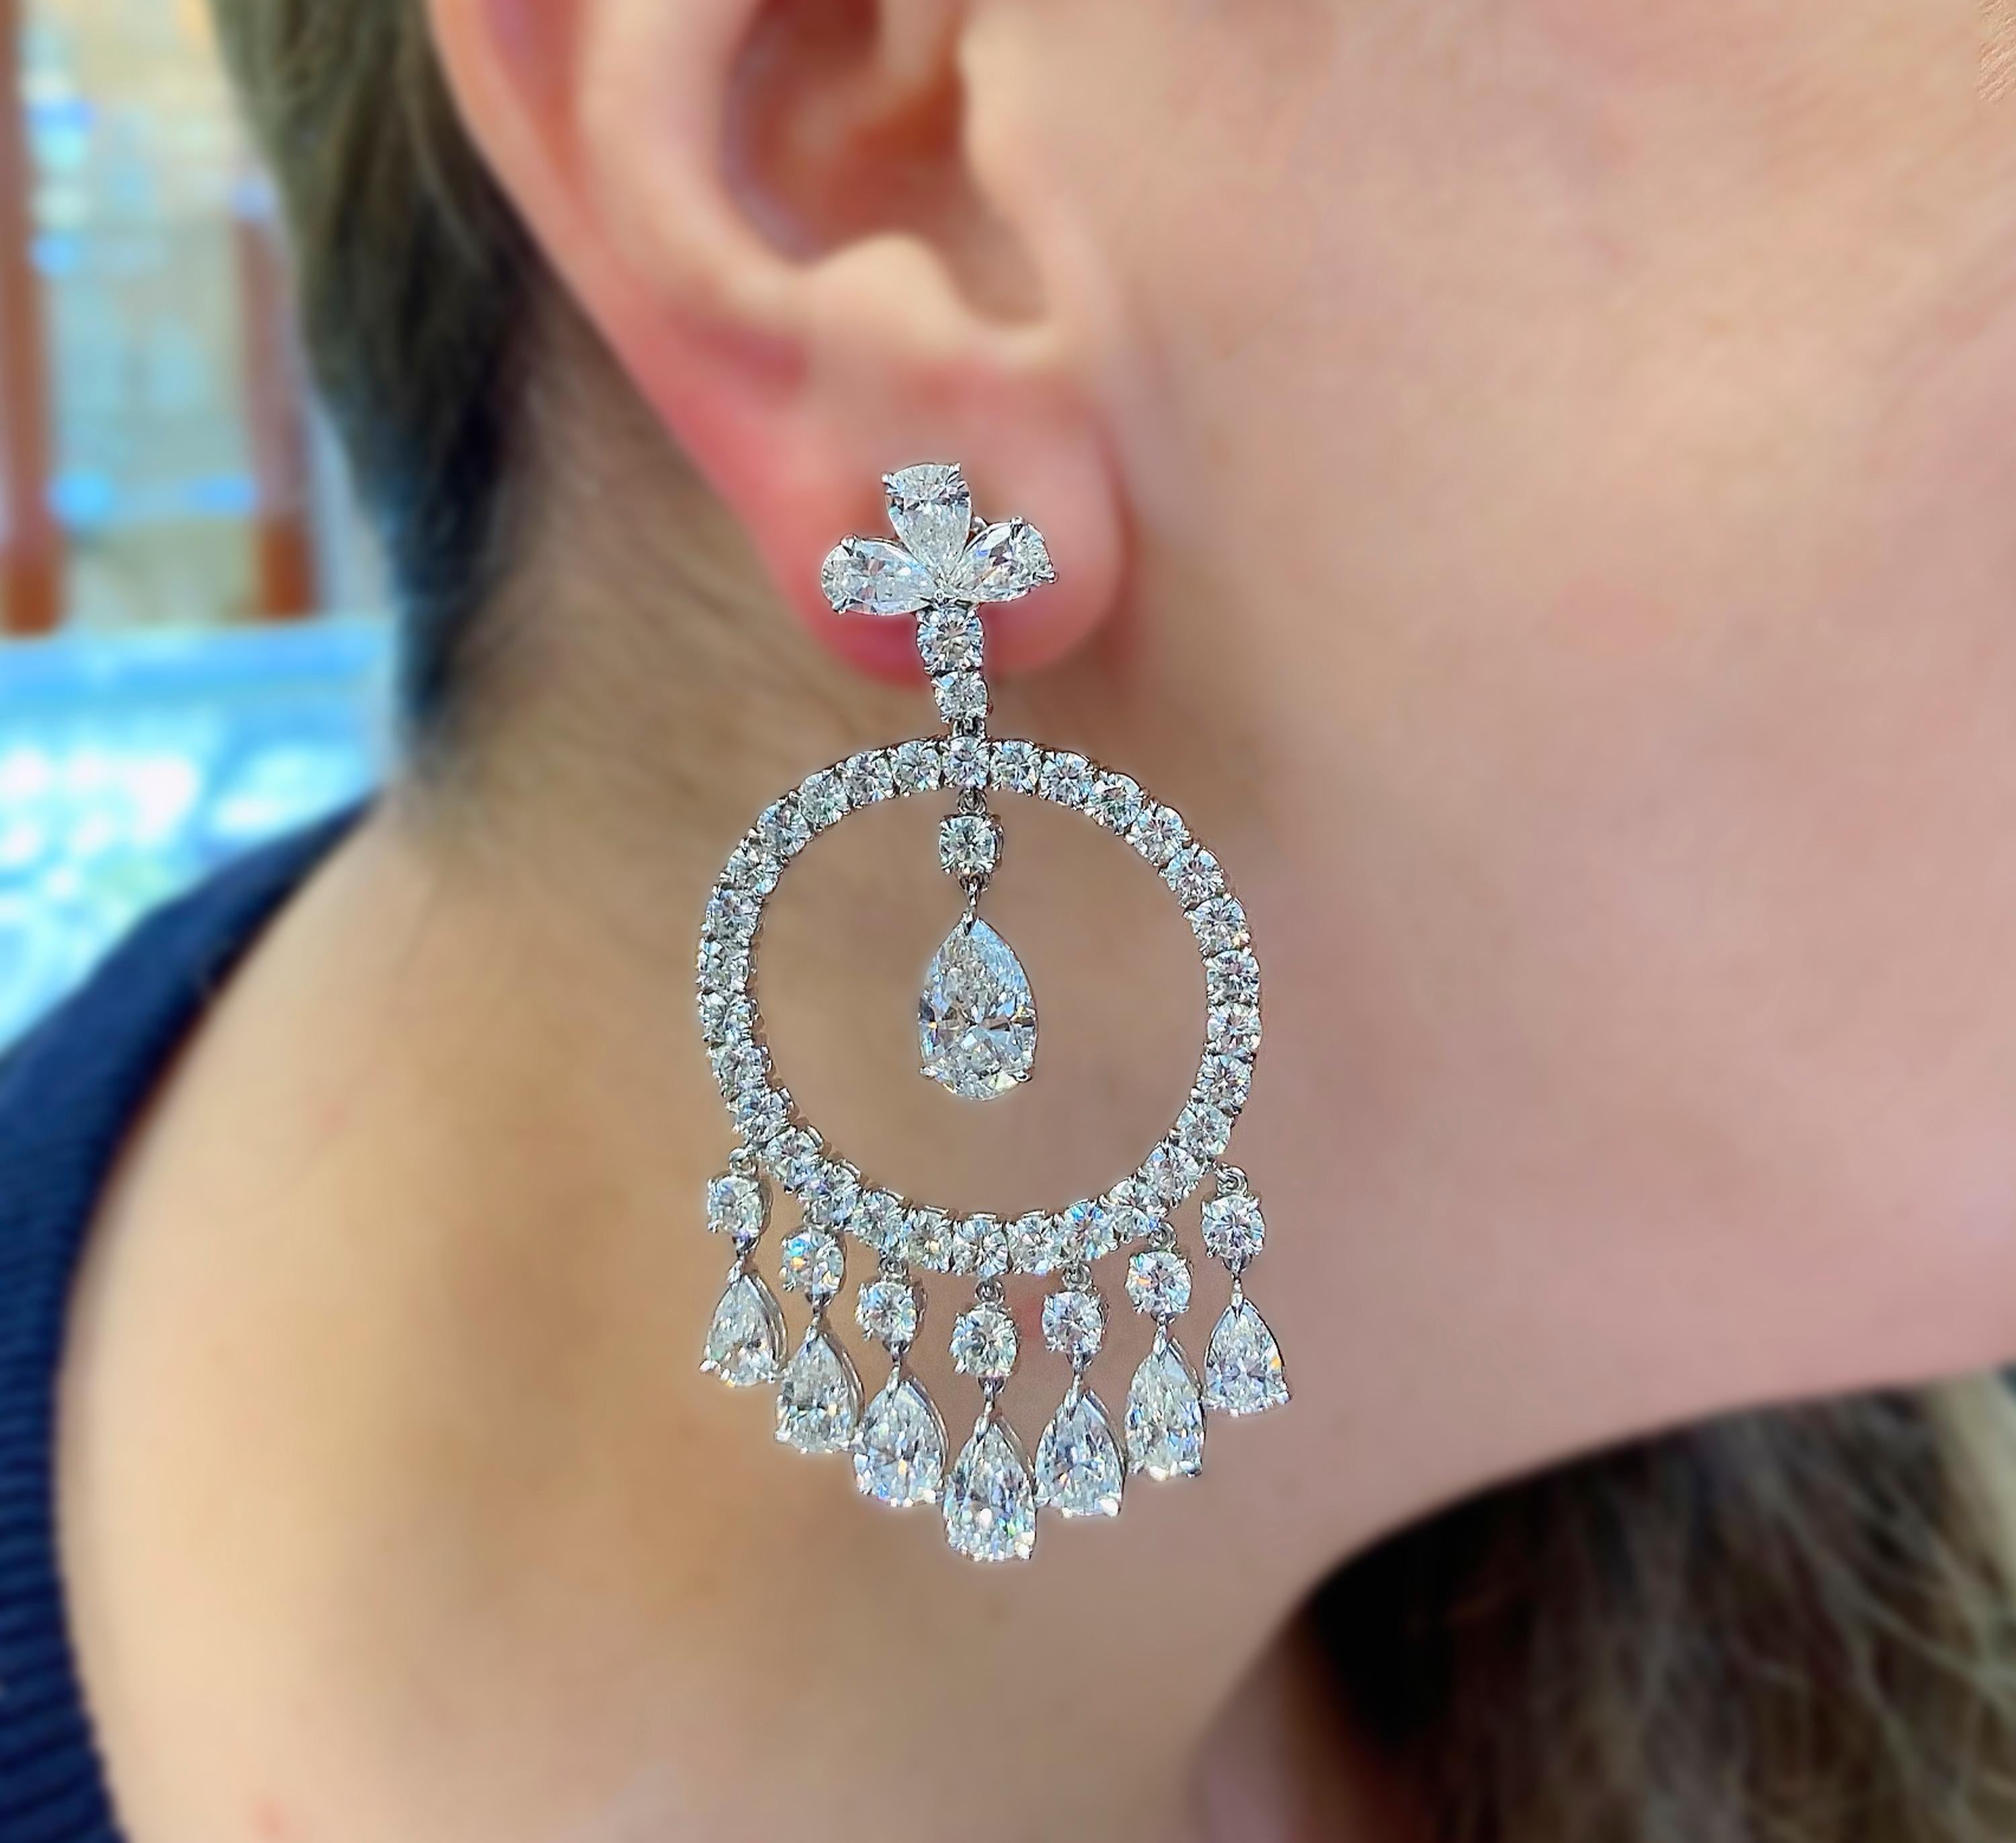 Sophia D 31.66 Carat Pear Shape Round Diamond Platinum Large Chandelier Earrings

These incredible earrings are a true statement by themselves. Round diamonds are set in the center in the circle with pear shape diamond drops underneath as well as in